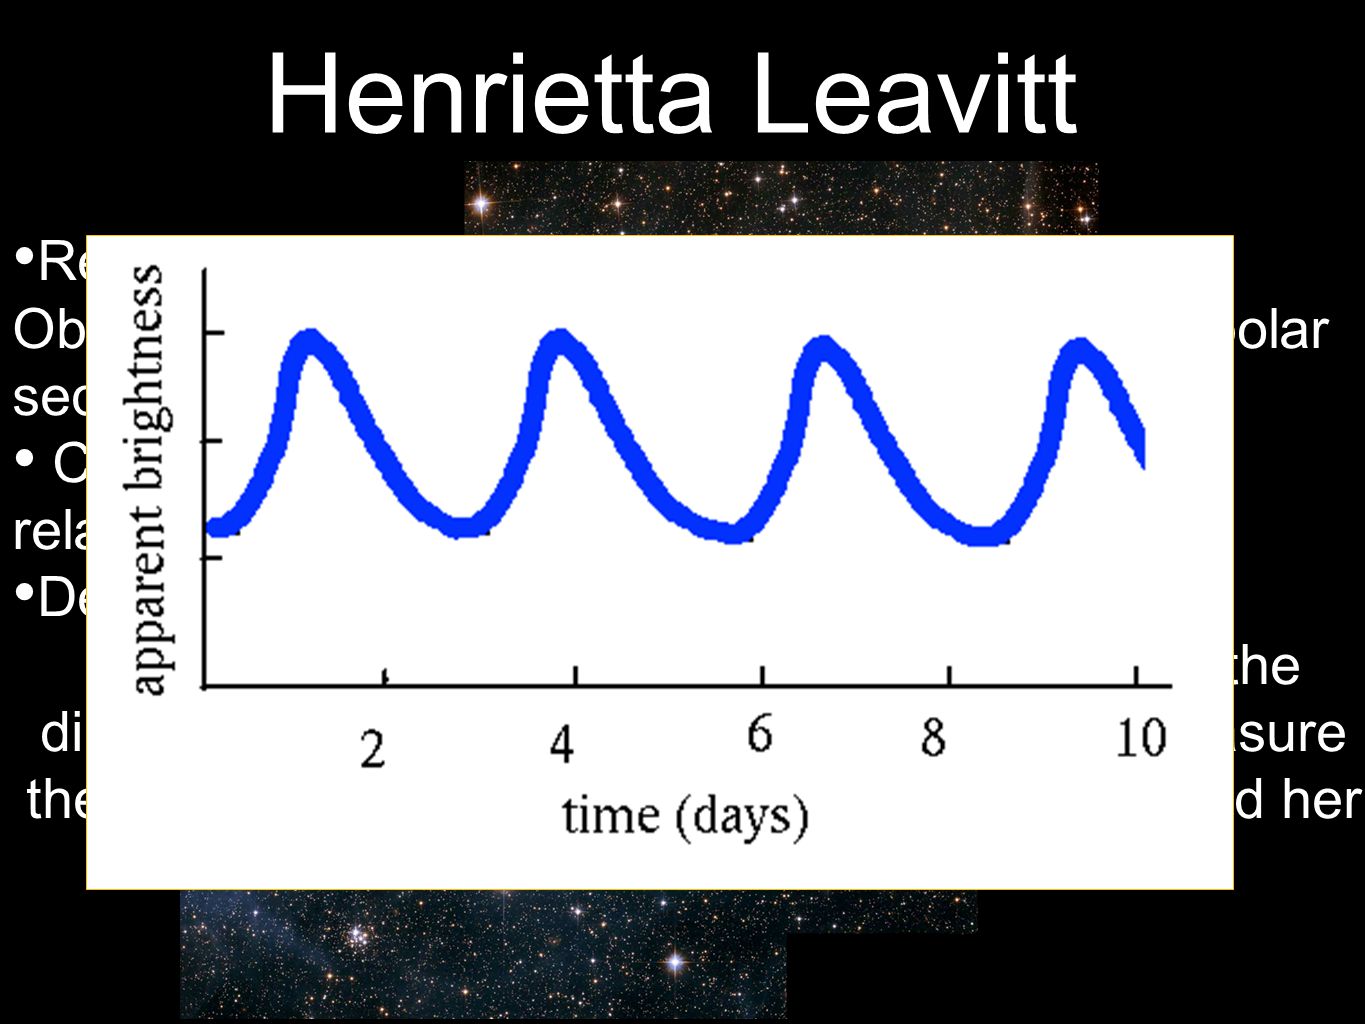 Henrietta Leavitt Research assistant at Harvard College Observatory.Devised a system, using the north polar sequence as a gage of brightness for stars Cepheid variables in SMC – period-luminosity relationship of these variables, Determine distances of stars Ejnar Hertzsprung used her discovery to plot the distance of stars; Harlow Shapley used it to measure the size of the Milky Way; and Edwin Hubble used her work to ascertain the age of the Universe.